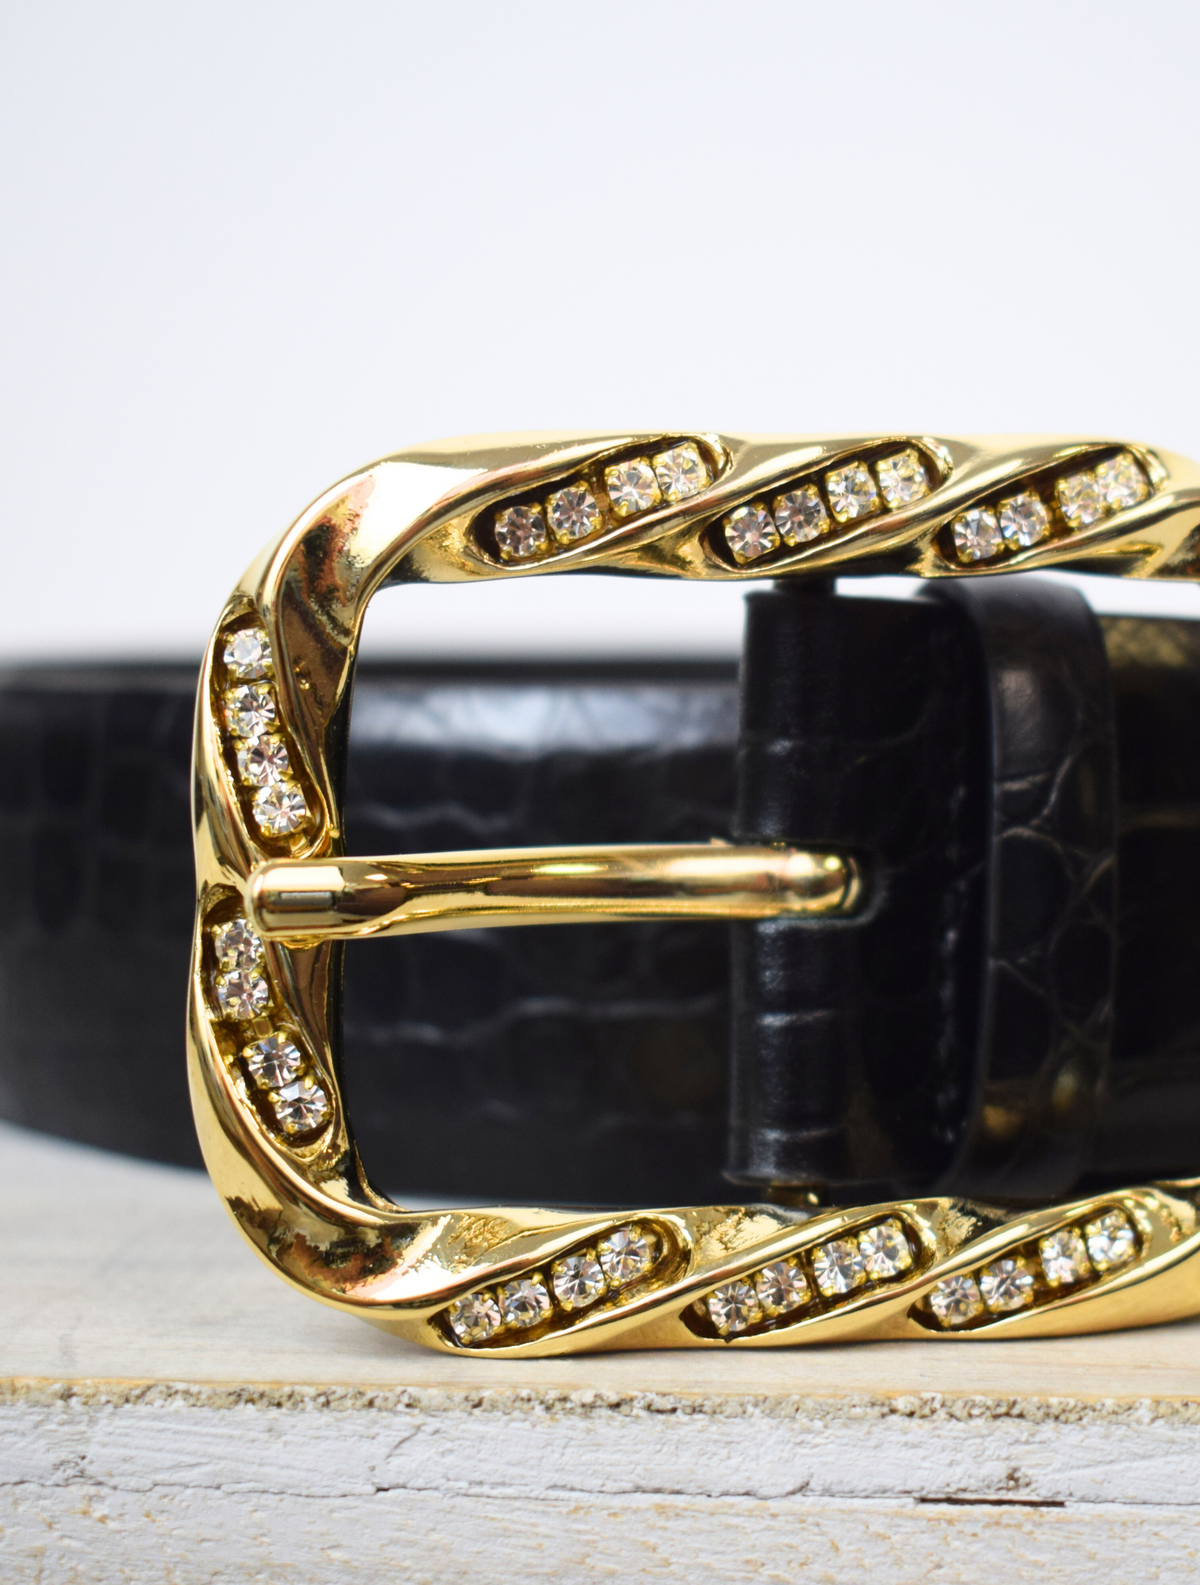 How To Style The Saint Laurent Logo Buckle Belt - Sassy In The City